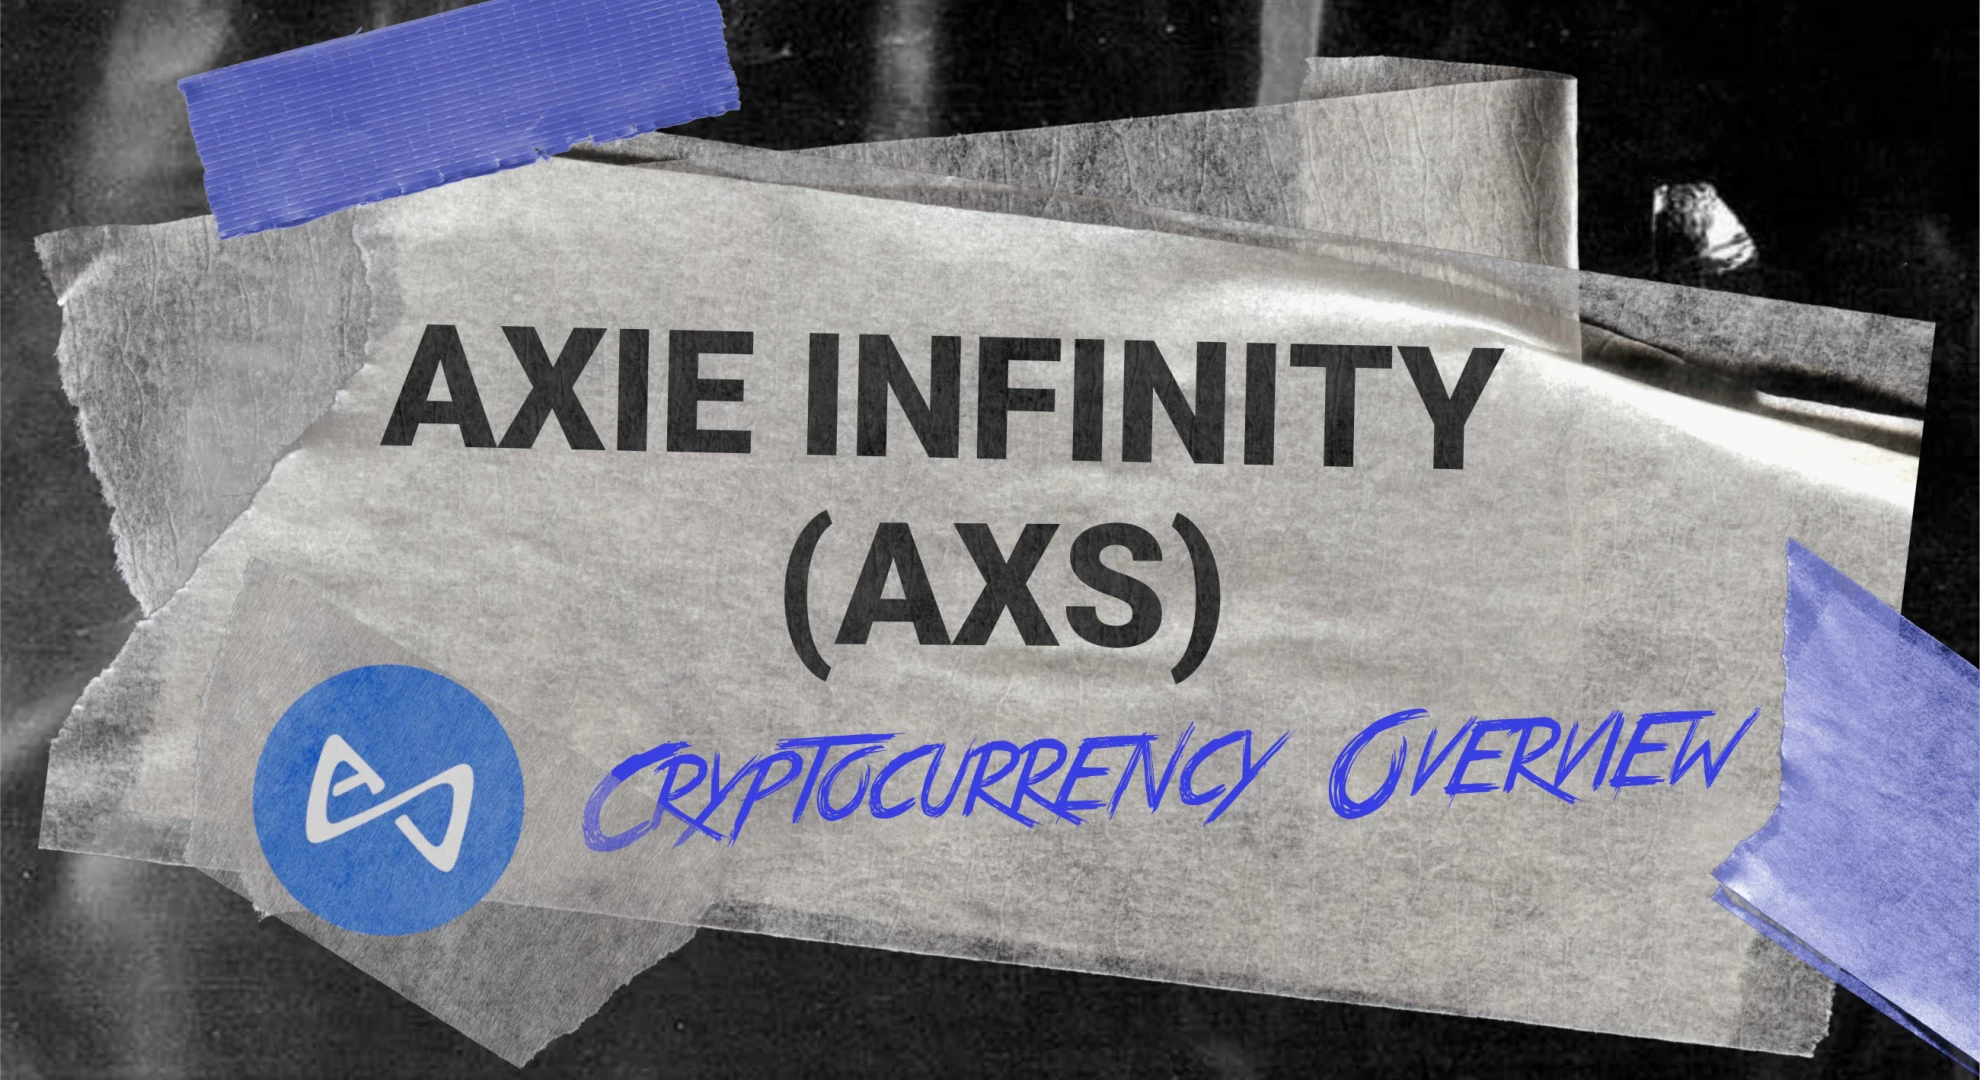 Axie Infinity (AXS) Cryptocurrency Overview